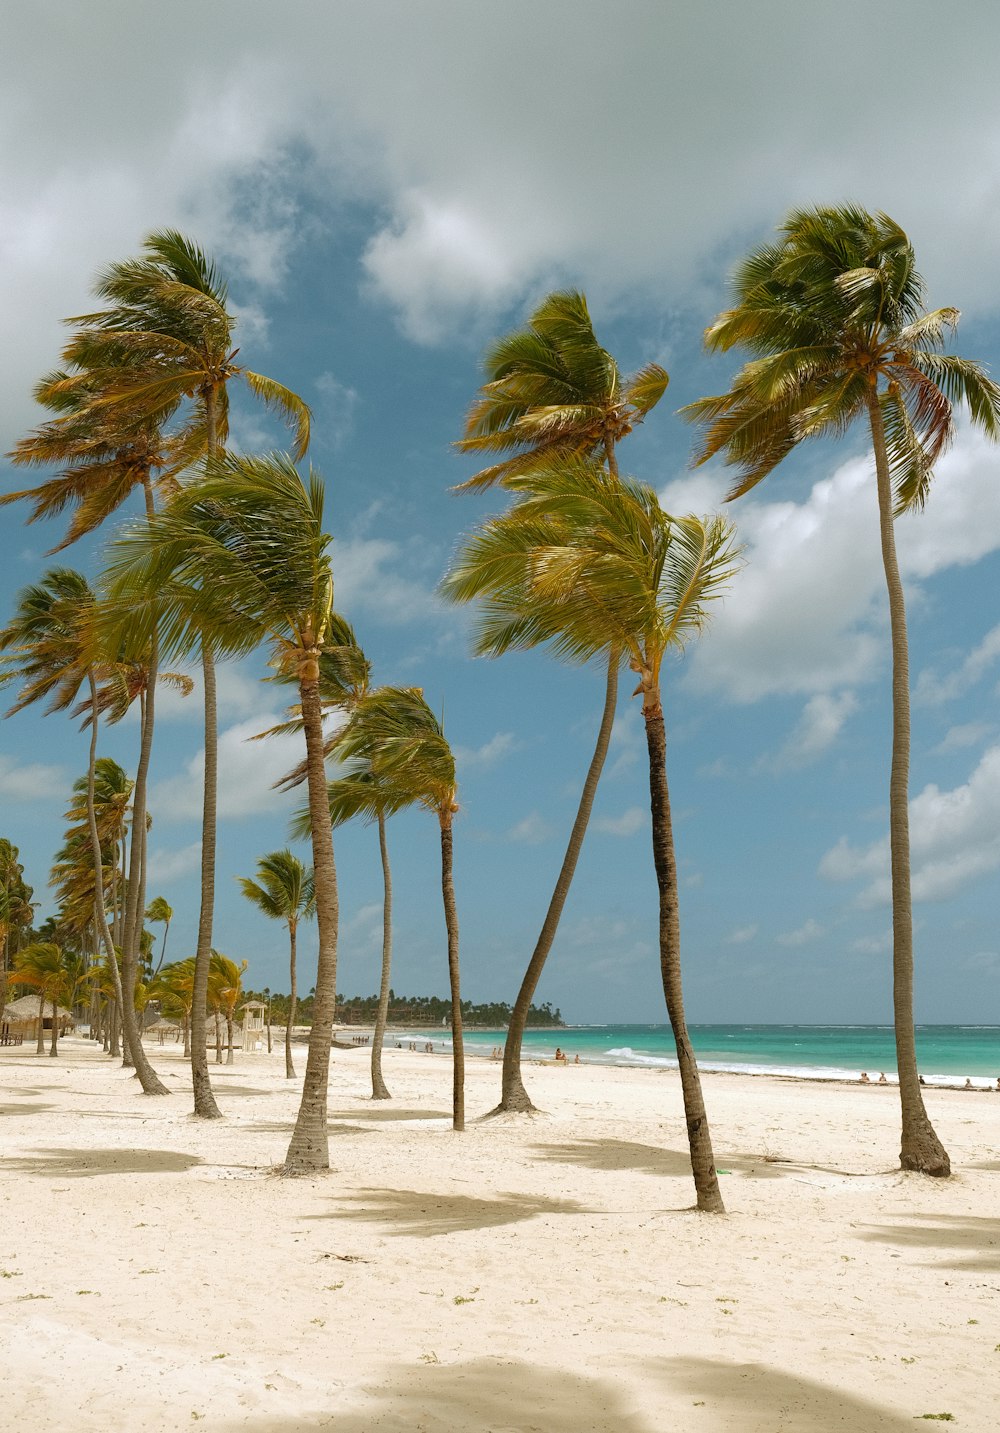 palm trees blowing in the wind on a beach